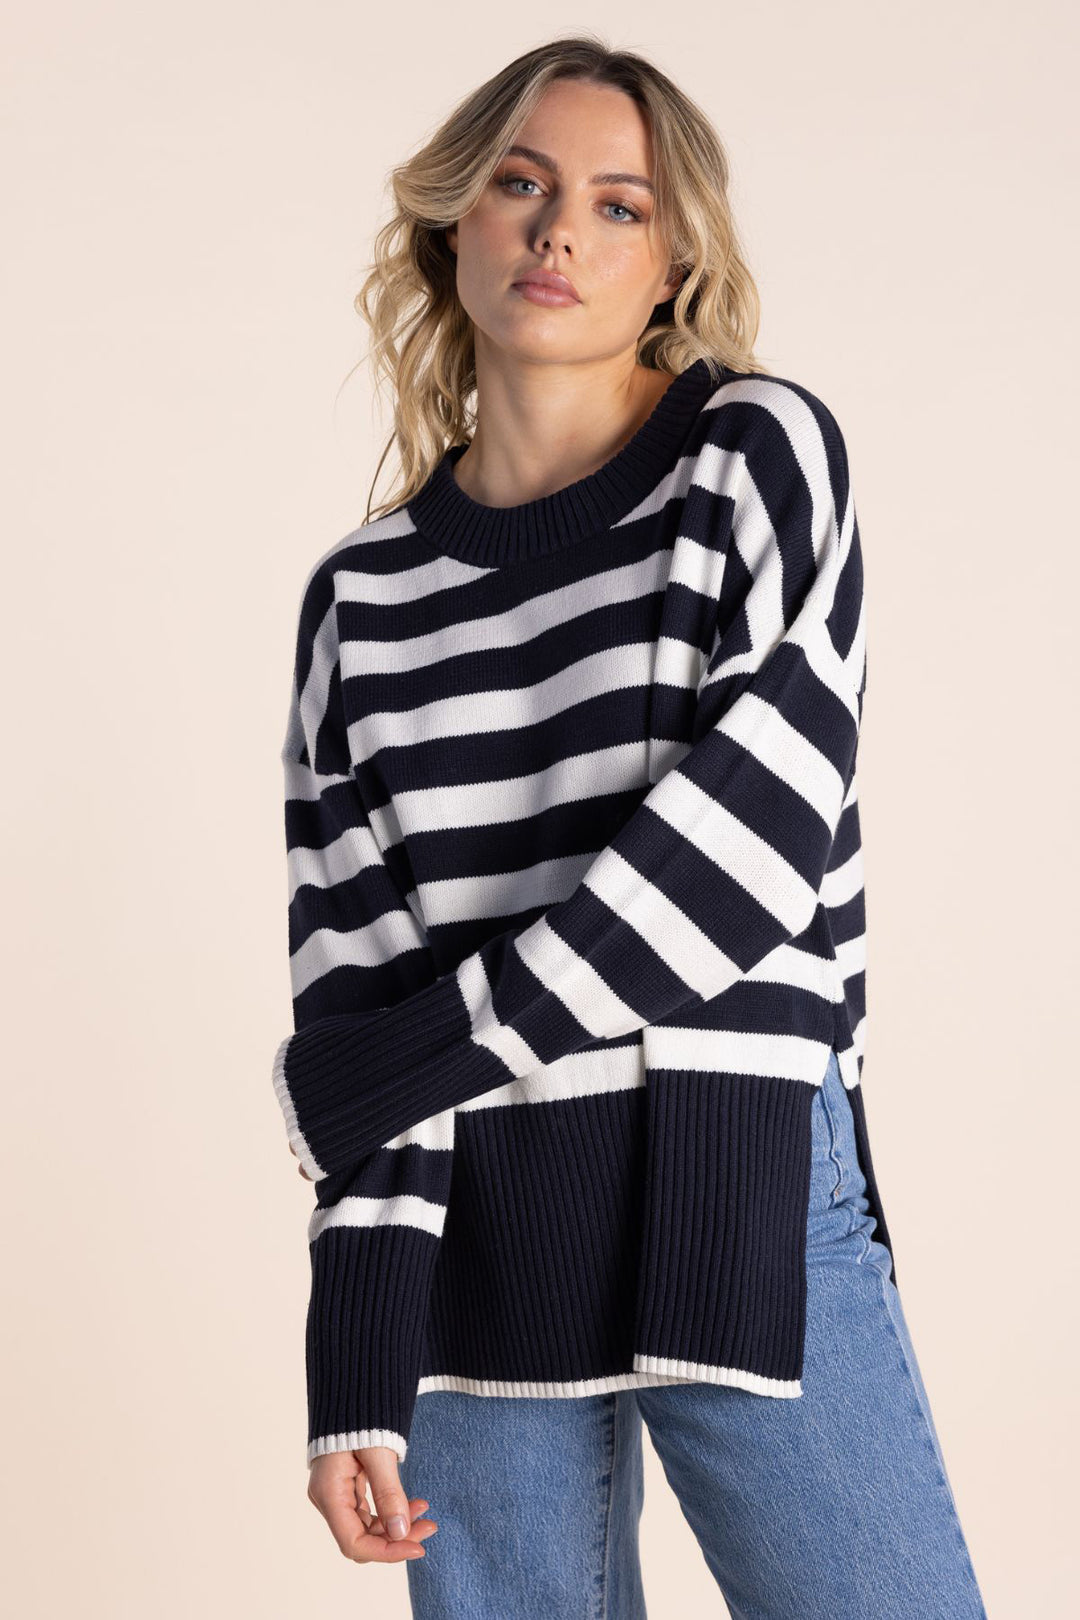 Brand : Two T's Style Code : 2557 Detachable Neck Stripe Sweater Colour : White Ink Fabric : 60% Cotton 40% Acrylic Delicate cold machine wash Removable cowl neck to give you options in all weather Side splits Long sleeve